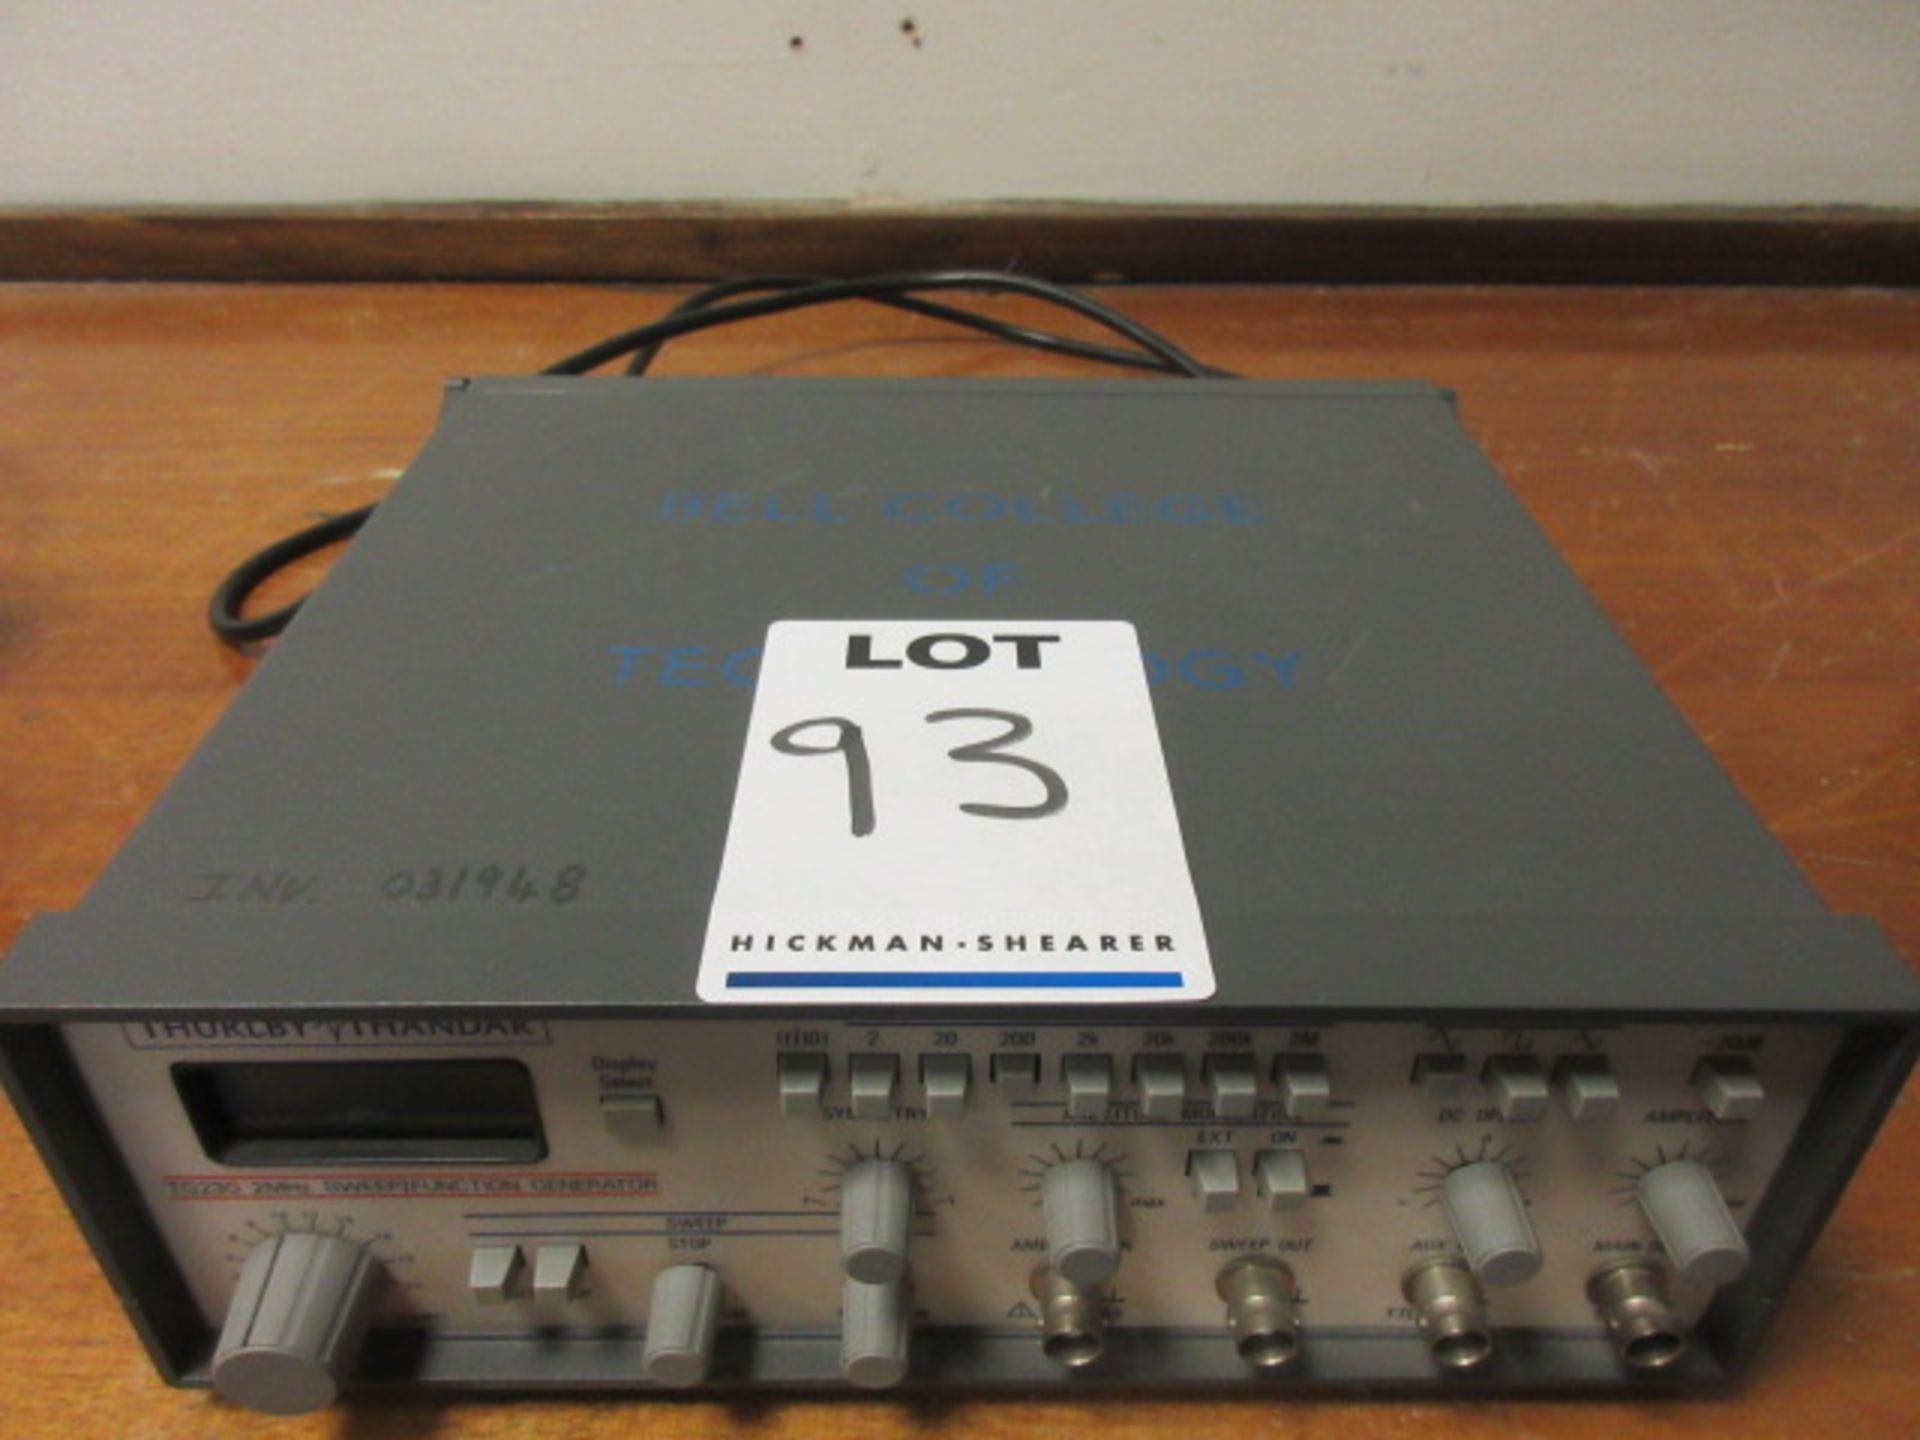 THURLBY & THANDAR TG230 2 MHz SWEEP/ FUNCTION GENERATOR - Image 2 of 2